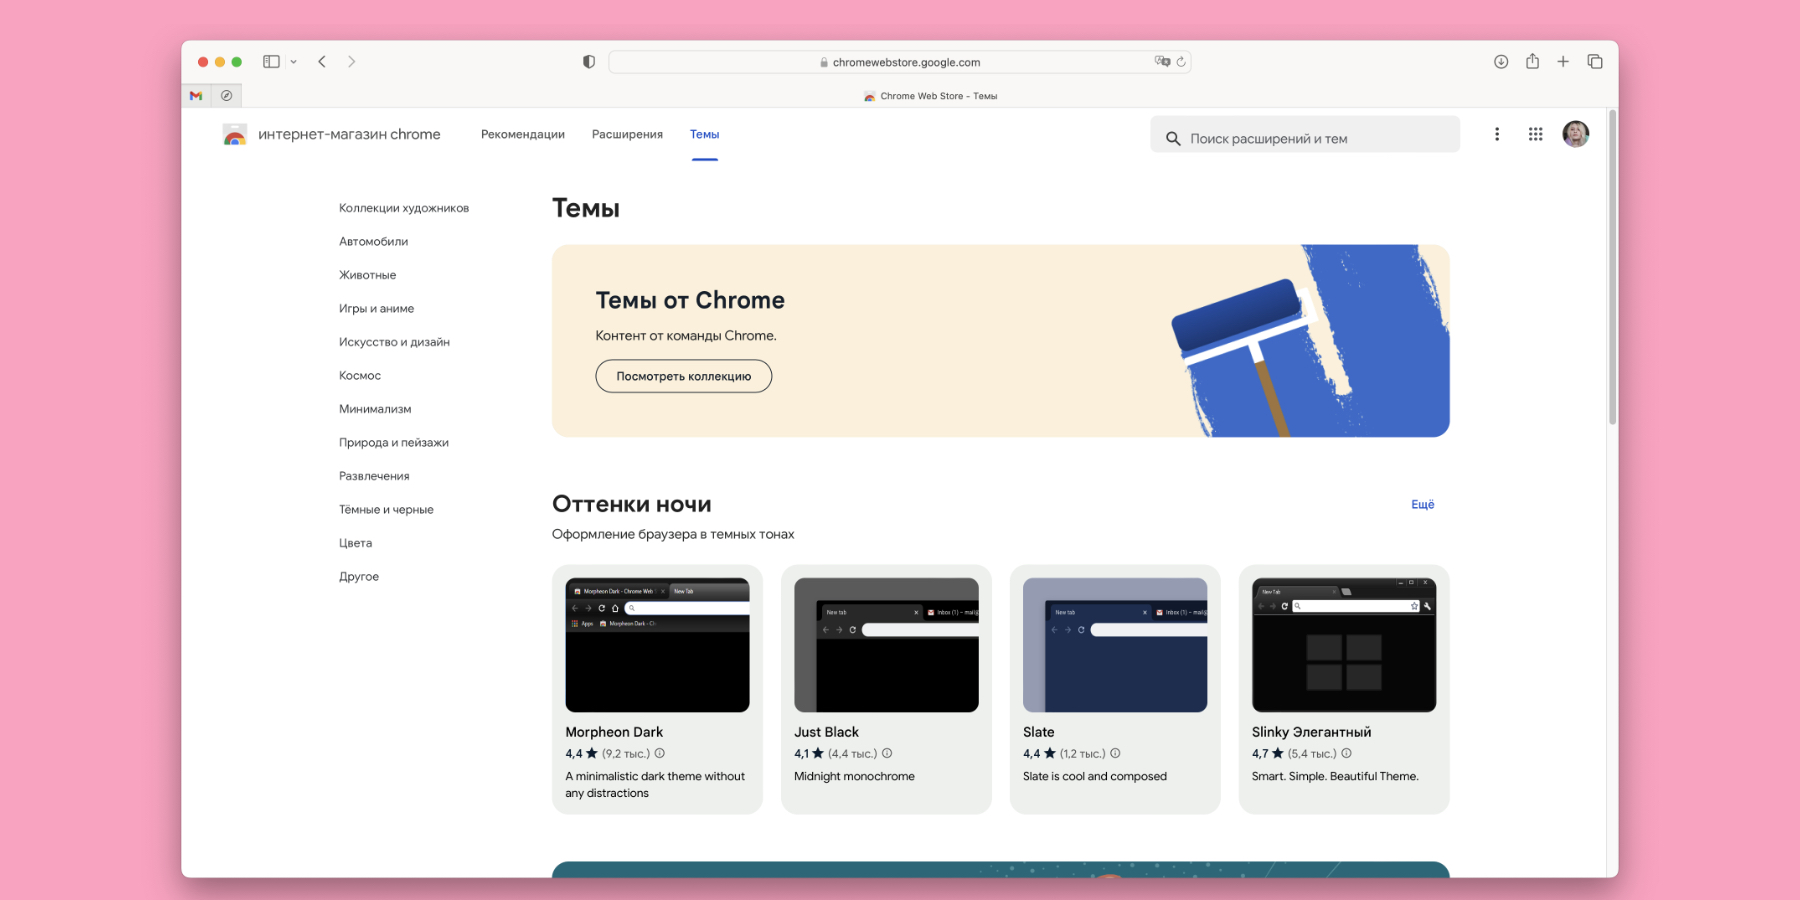 Google has launched a completely redesigned Chrome Extensions and Themes store